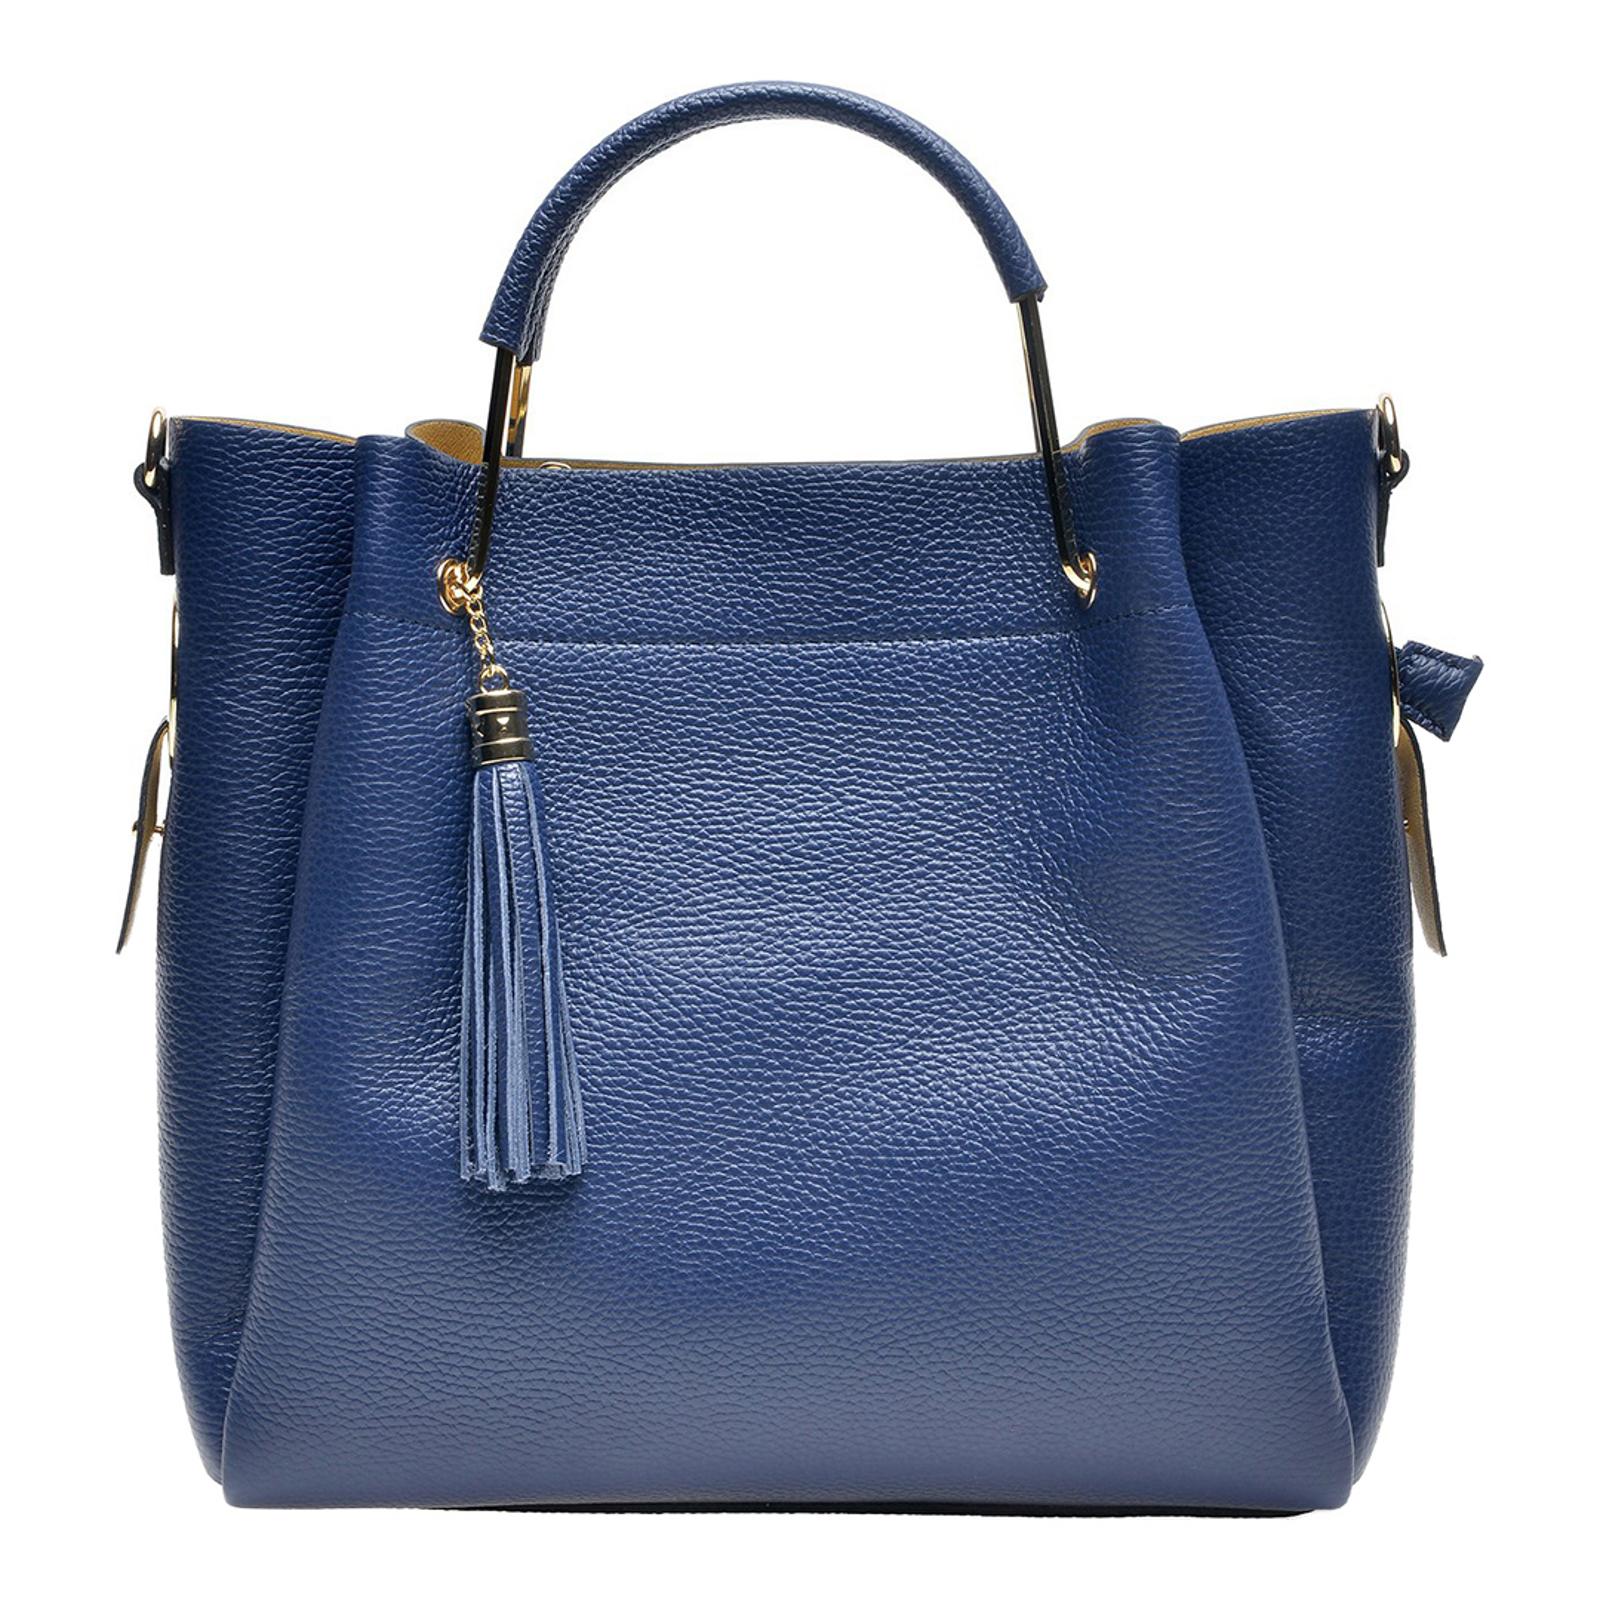 Blue Leather Tote Bag - BrandAlley